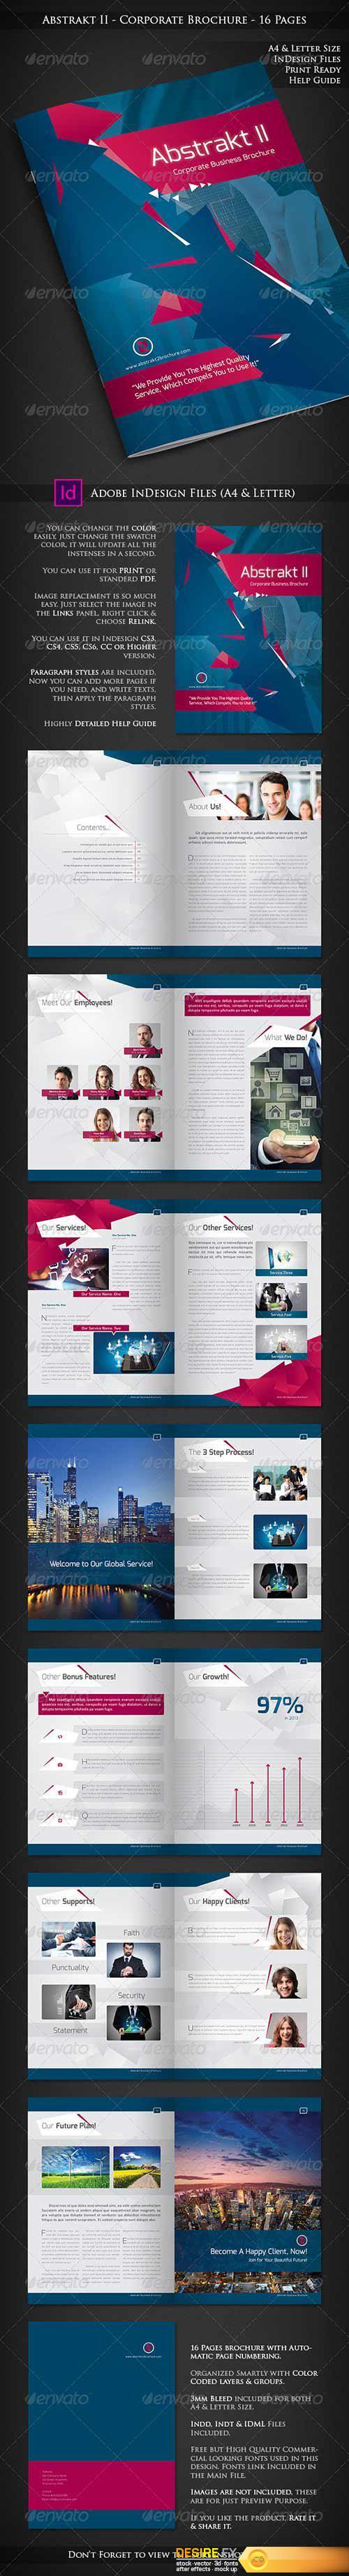 Graphicriver - Abstrakt II - Corporate Company Profile - 16 Pages 7741702